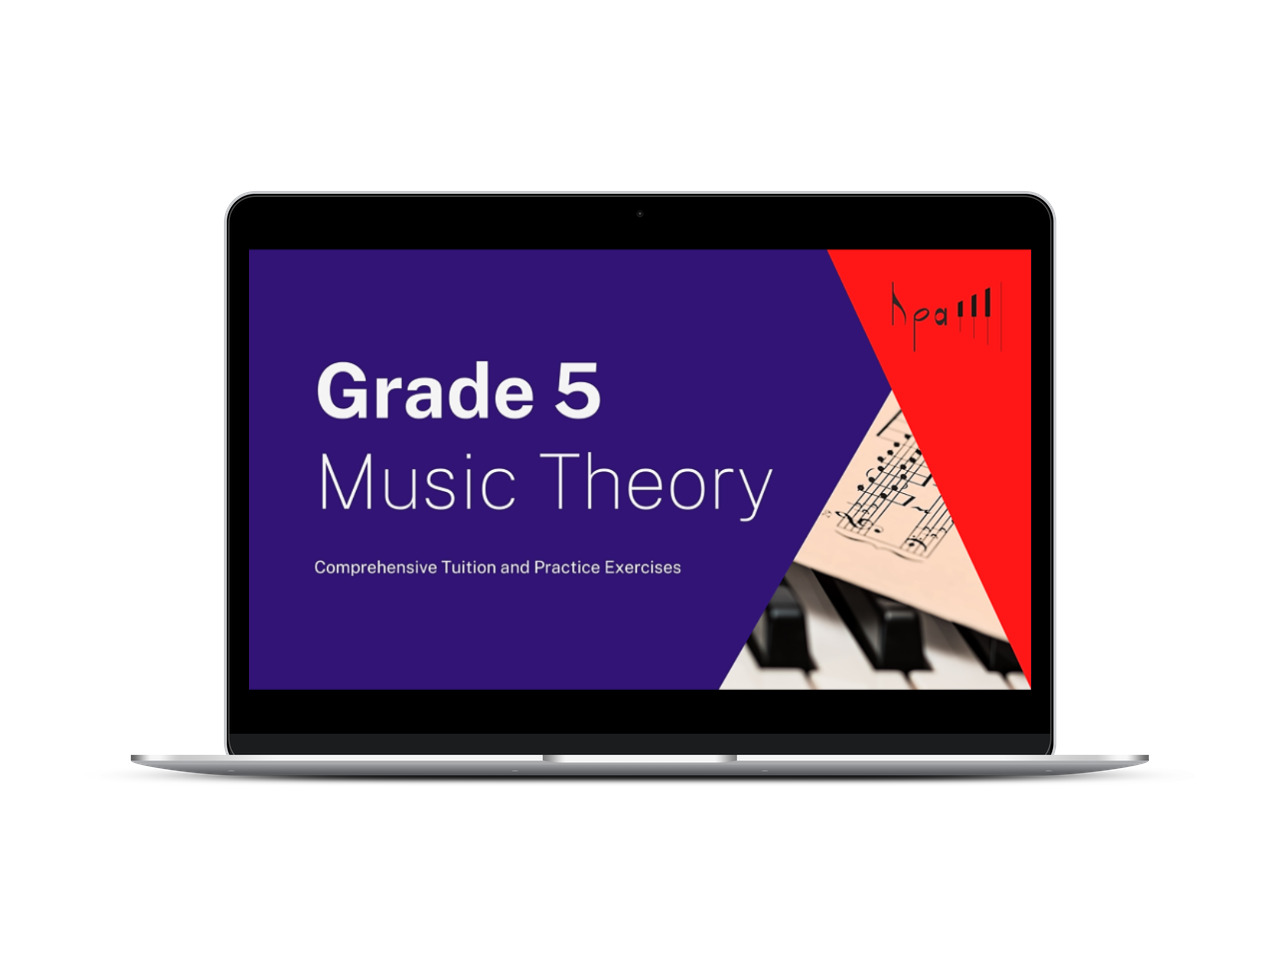 Grade 5 music theory online course